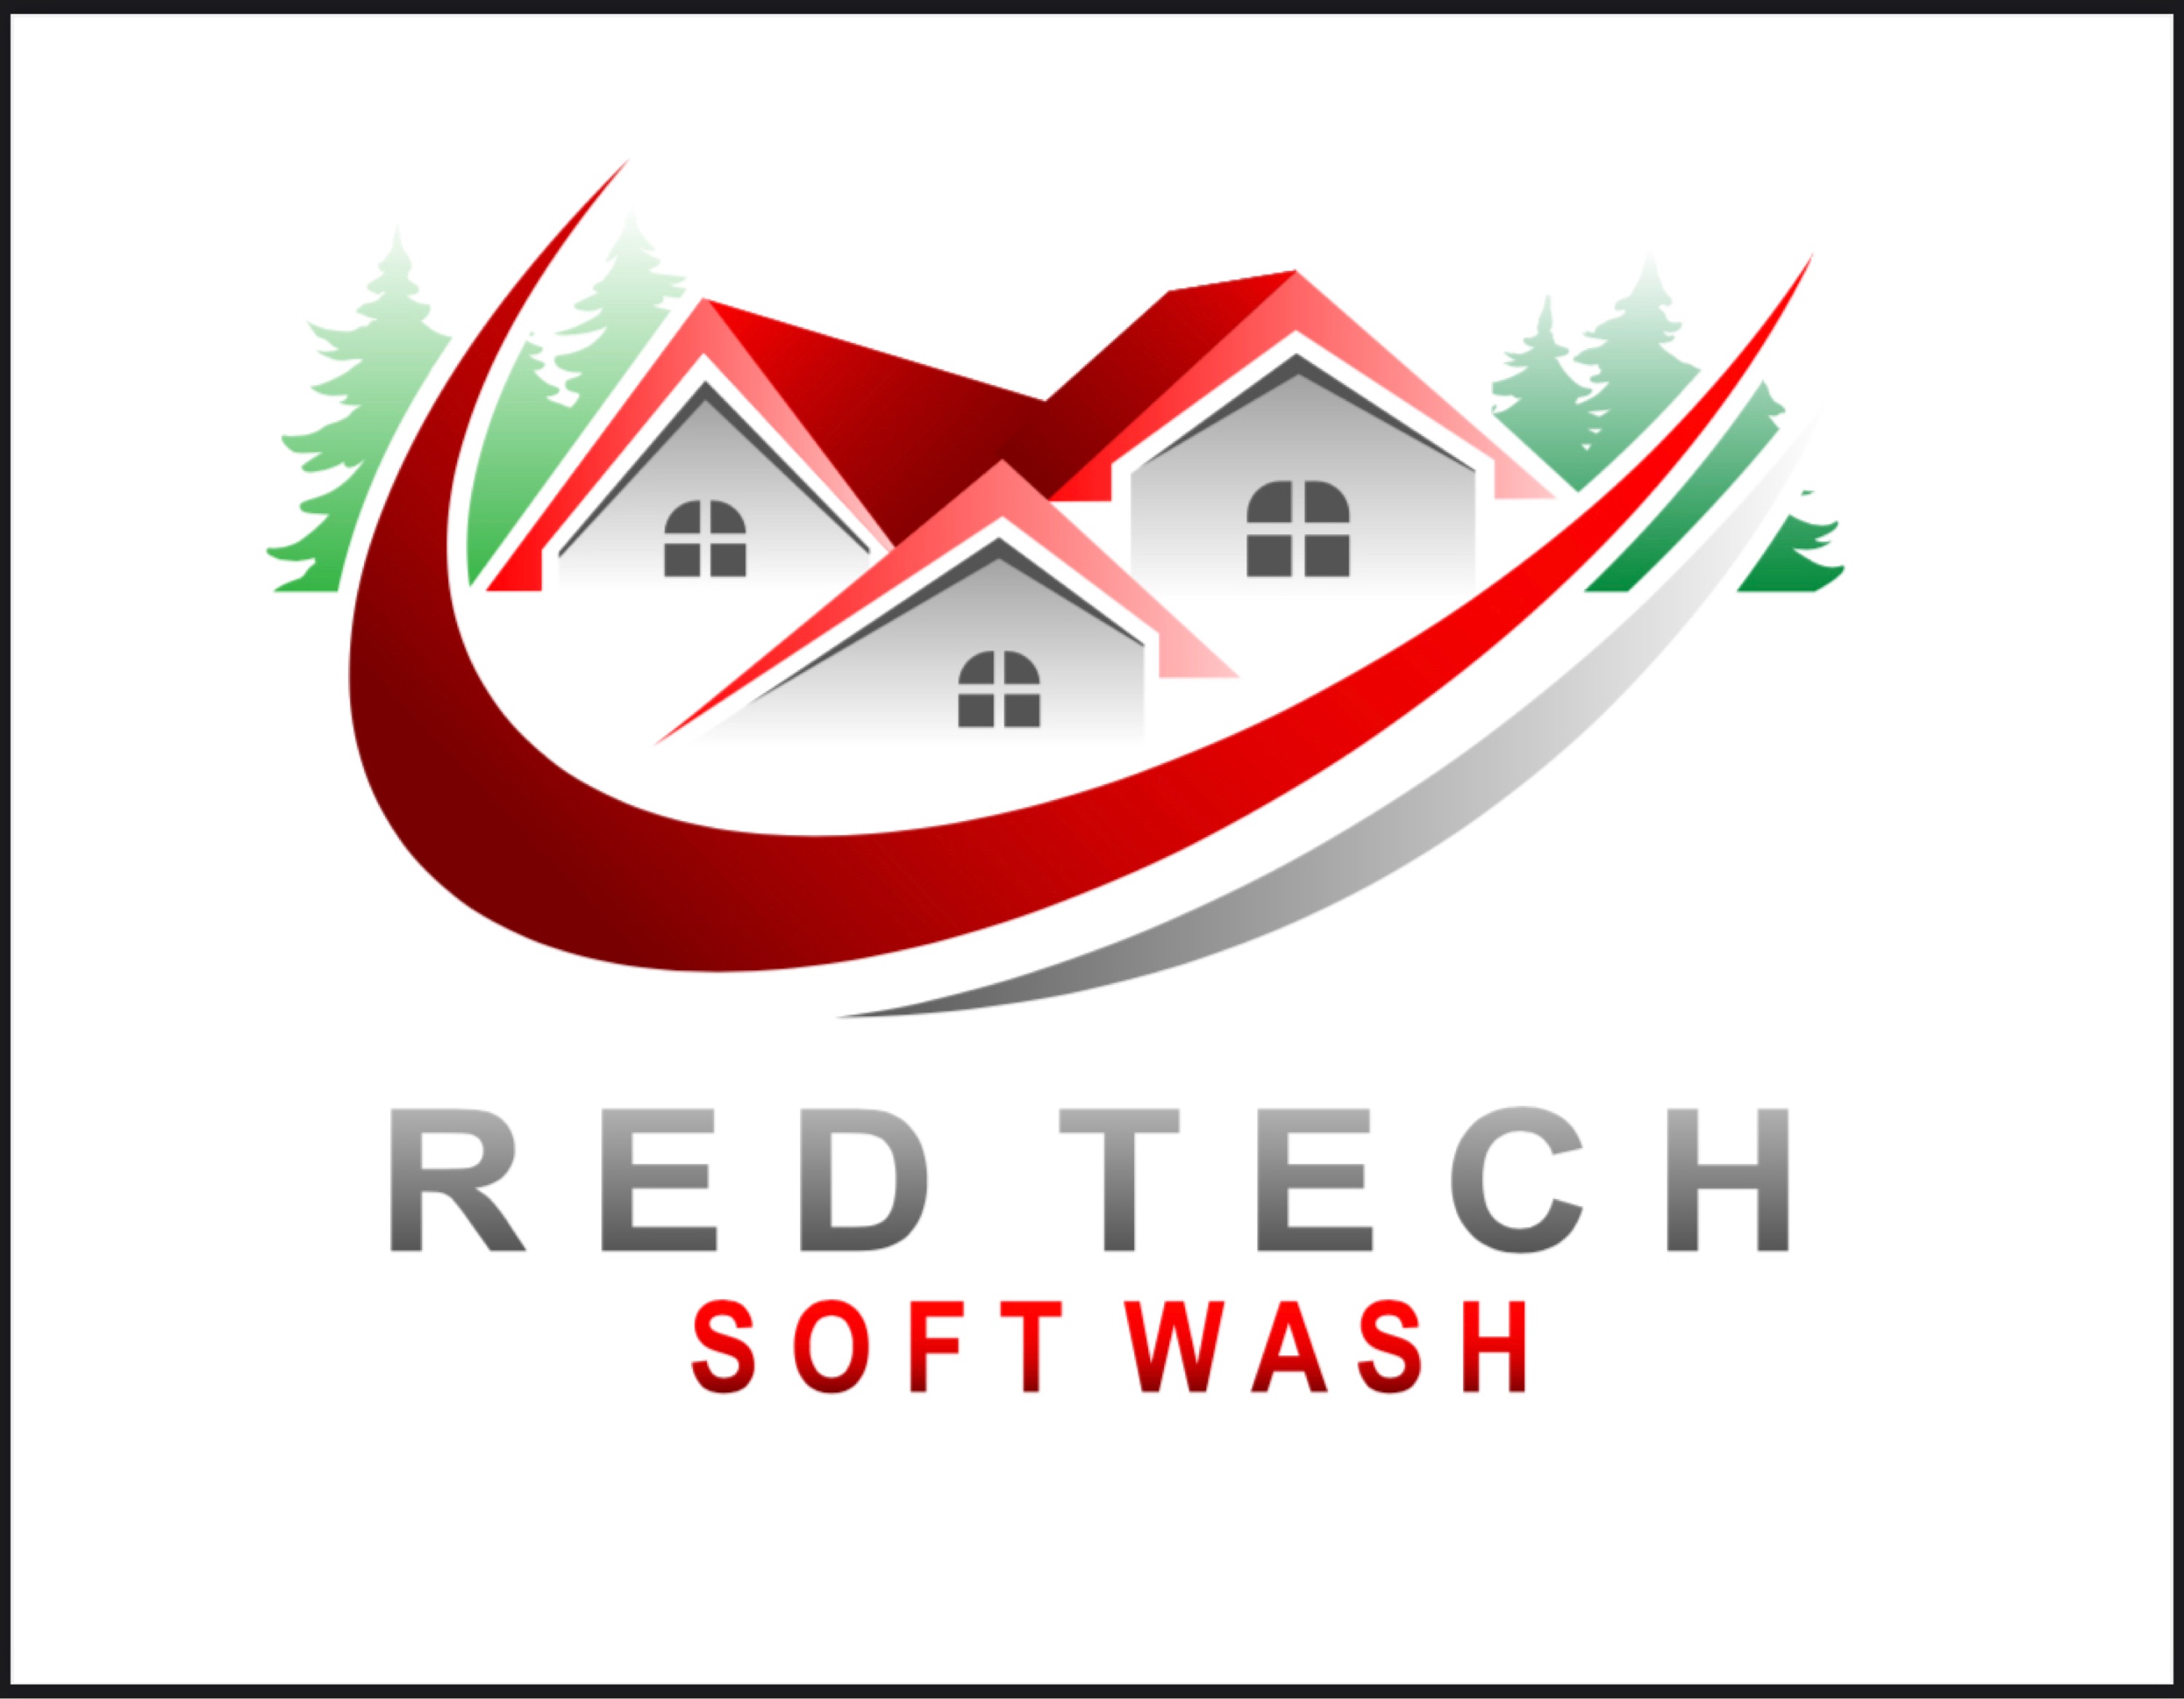 Red Tech Soft Wash - Unlicensed Contractor Logo